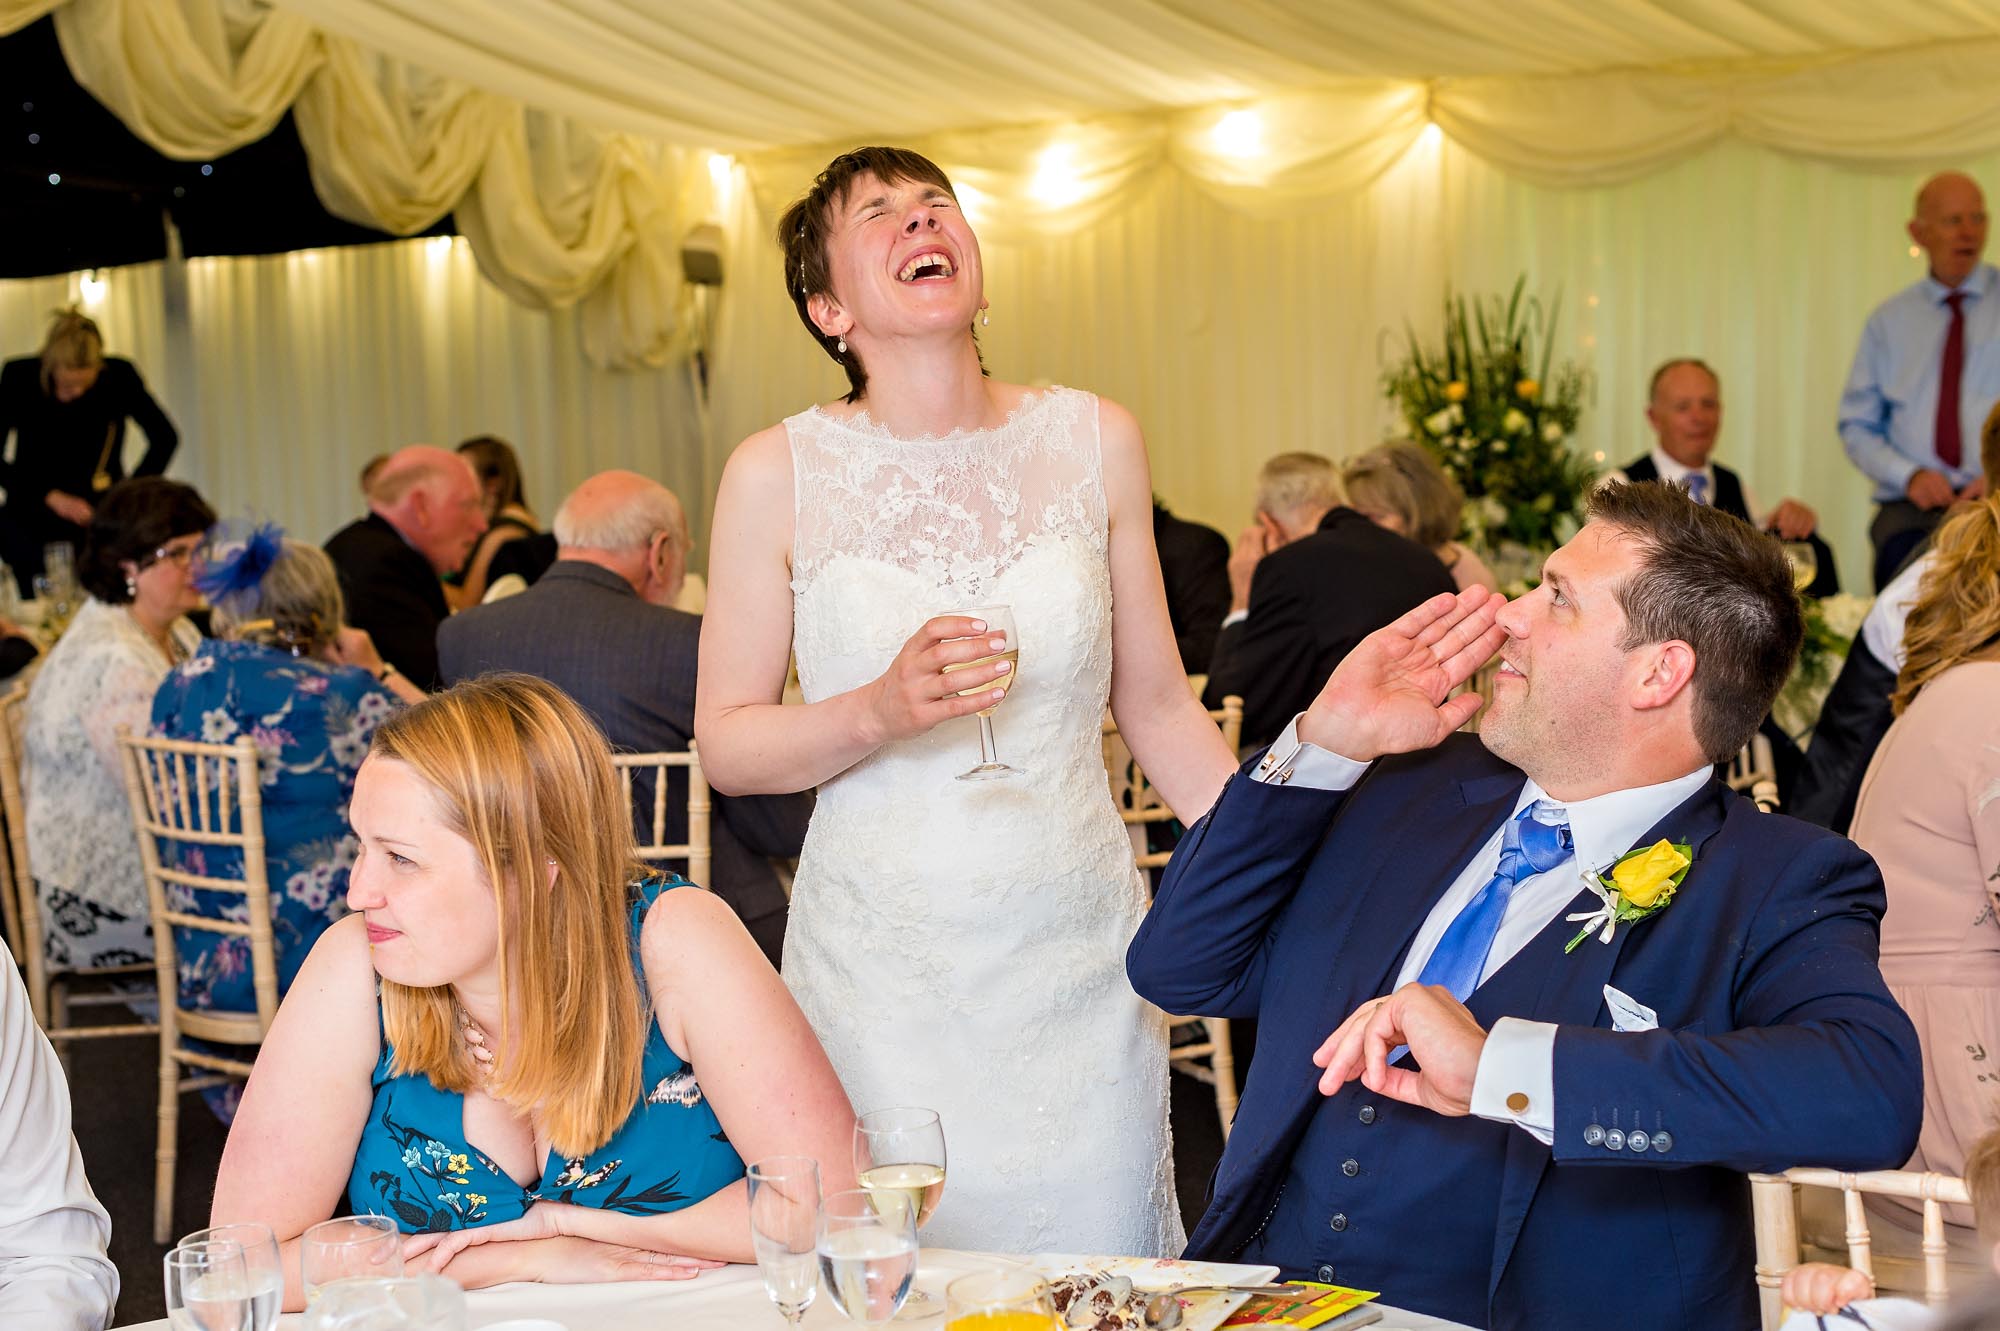 As the bride circulates during the wedding reception, she laughs with a guest